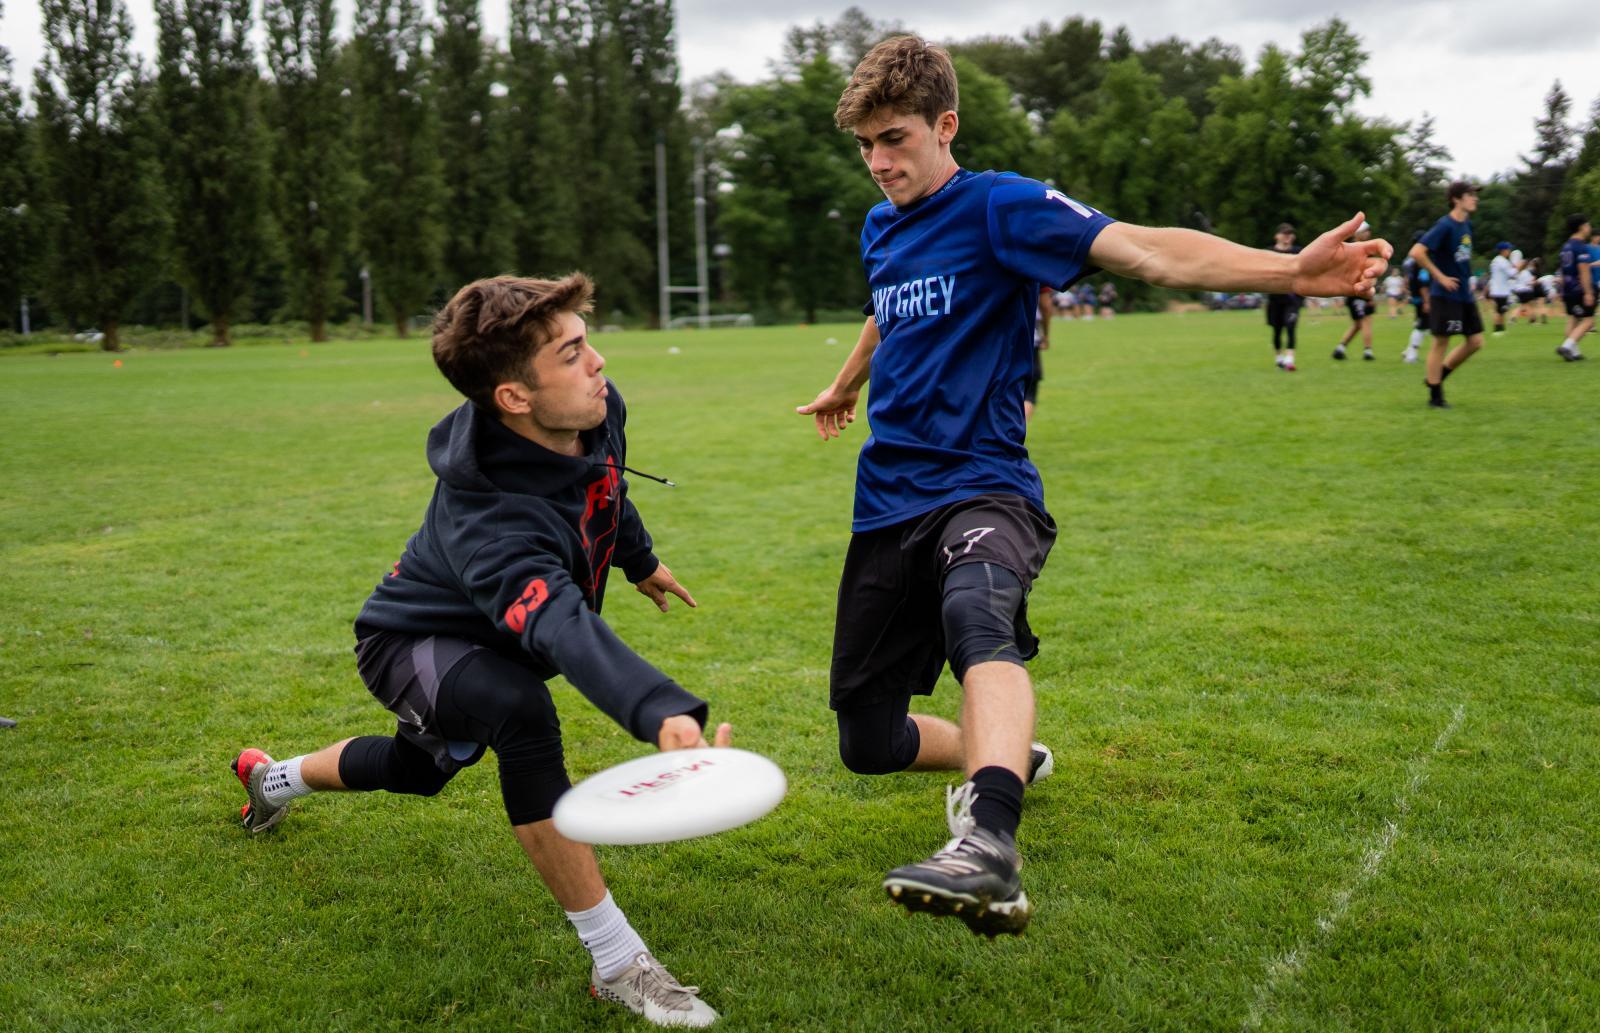 Jeux Animations Sports: exercices d'Ultimate frisbee